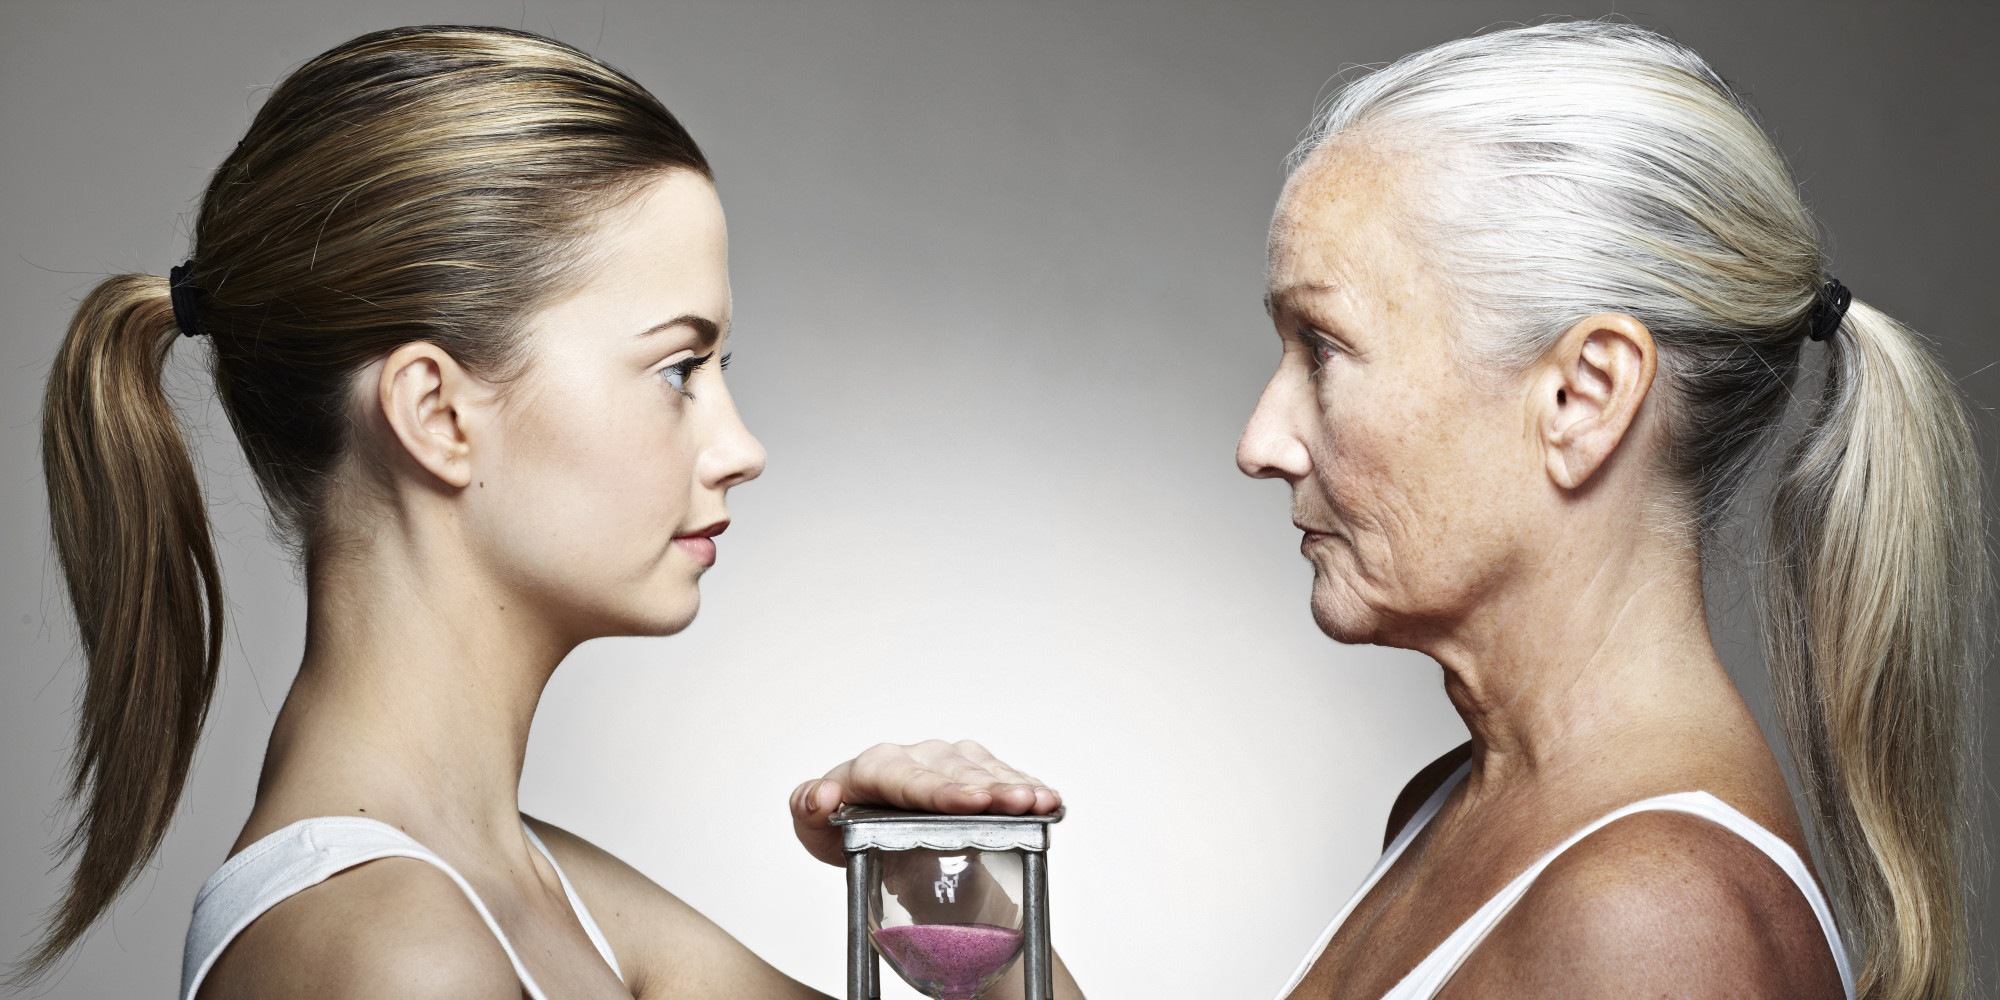 Genetic Discovery Could Help Researchers Reverse Aging And Prolong
Lifespan HuffPost